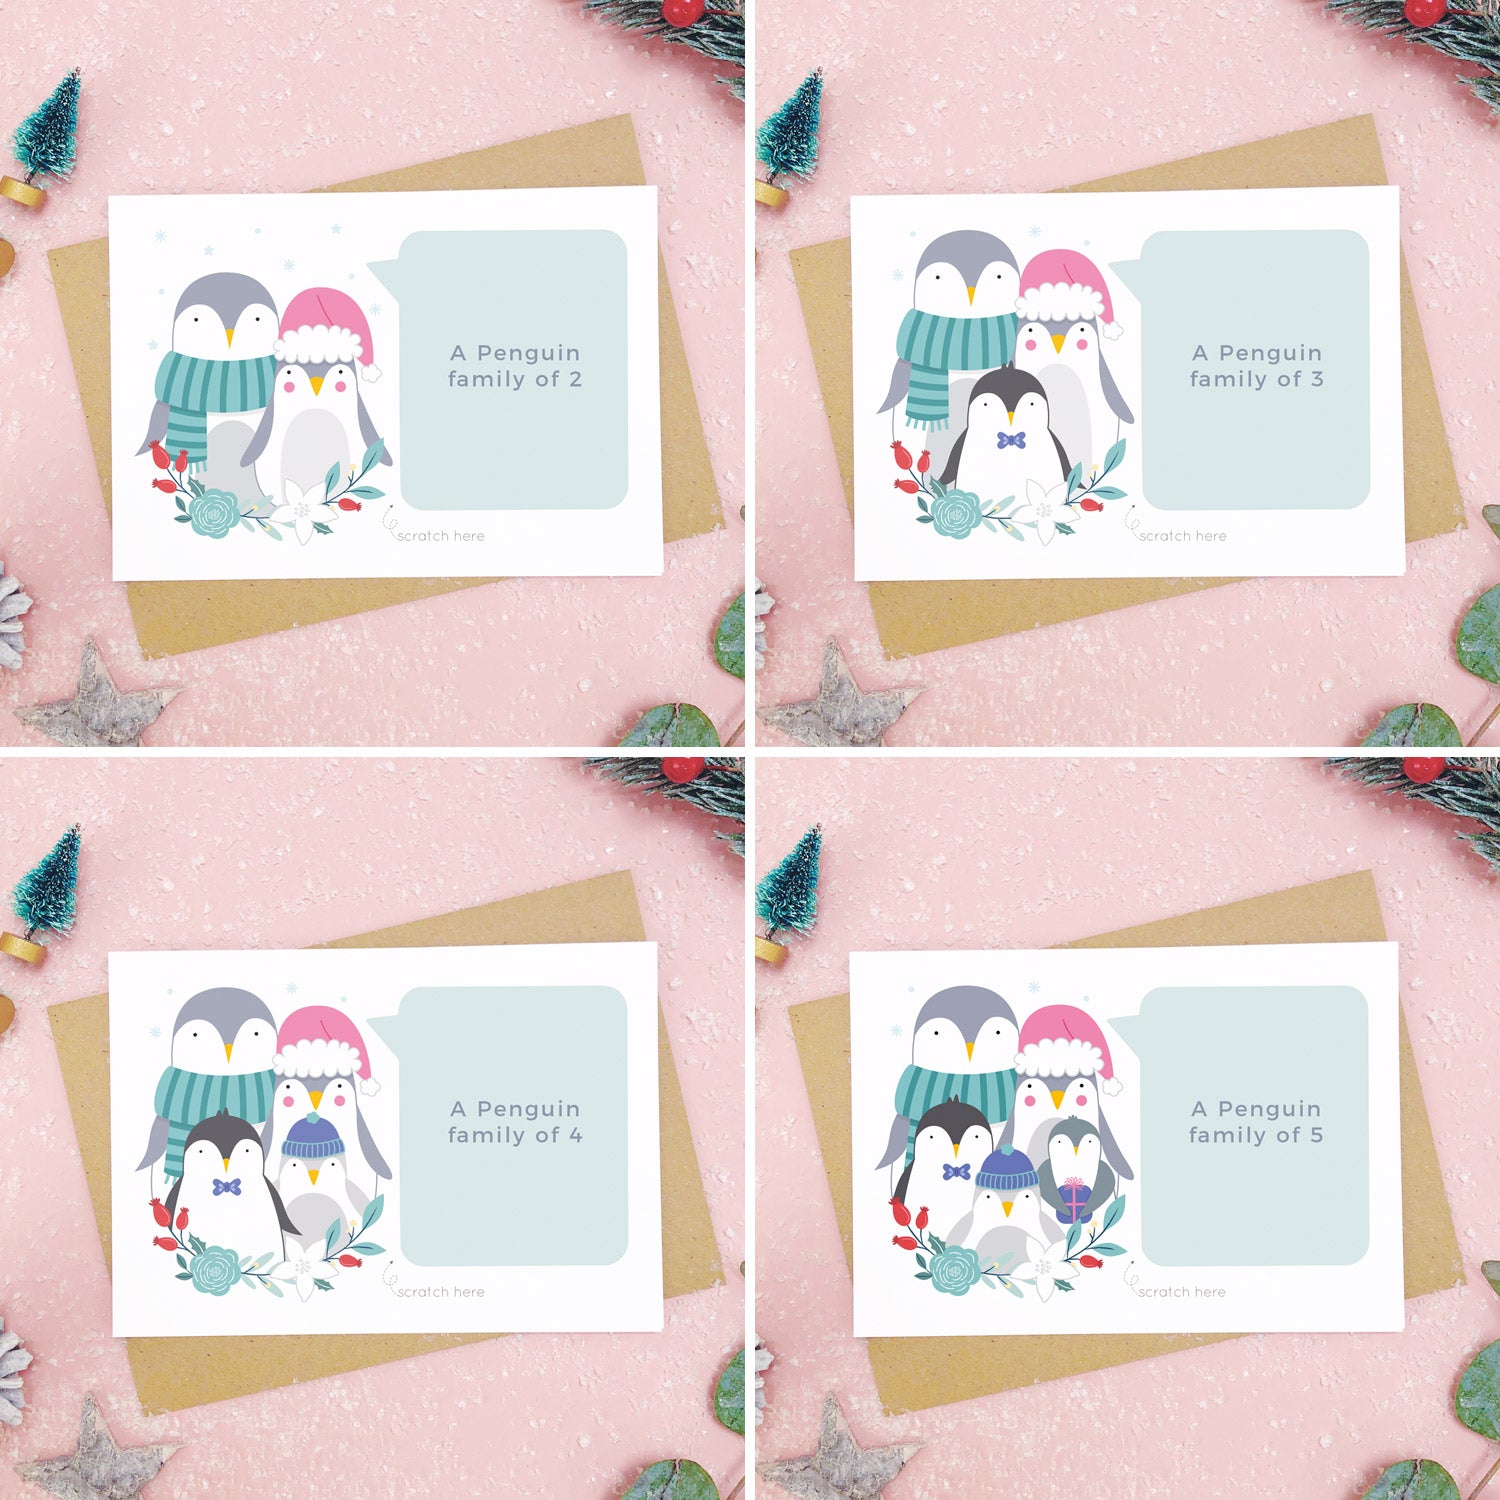 A combination of images each showing an example of what a family of 2, 3, 4, or 5 penguins looks like. Each shot on a pink background with festive props and sprinkles of snow.